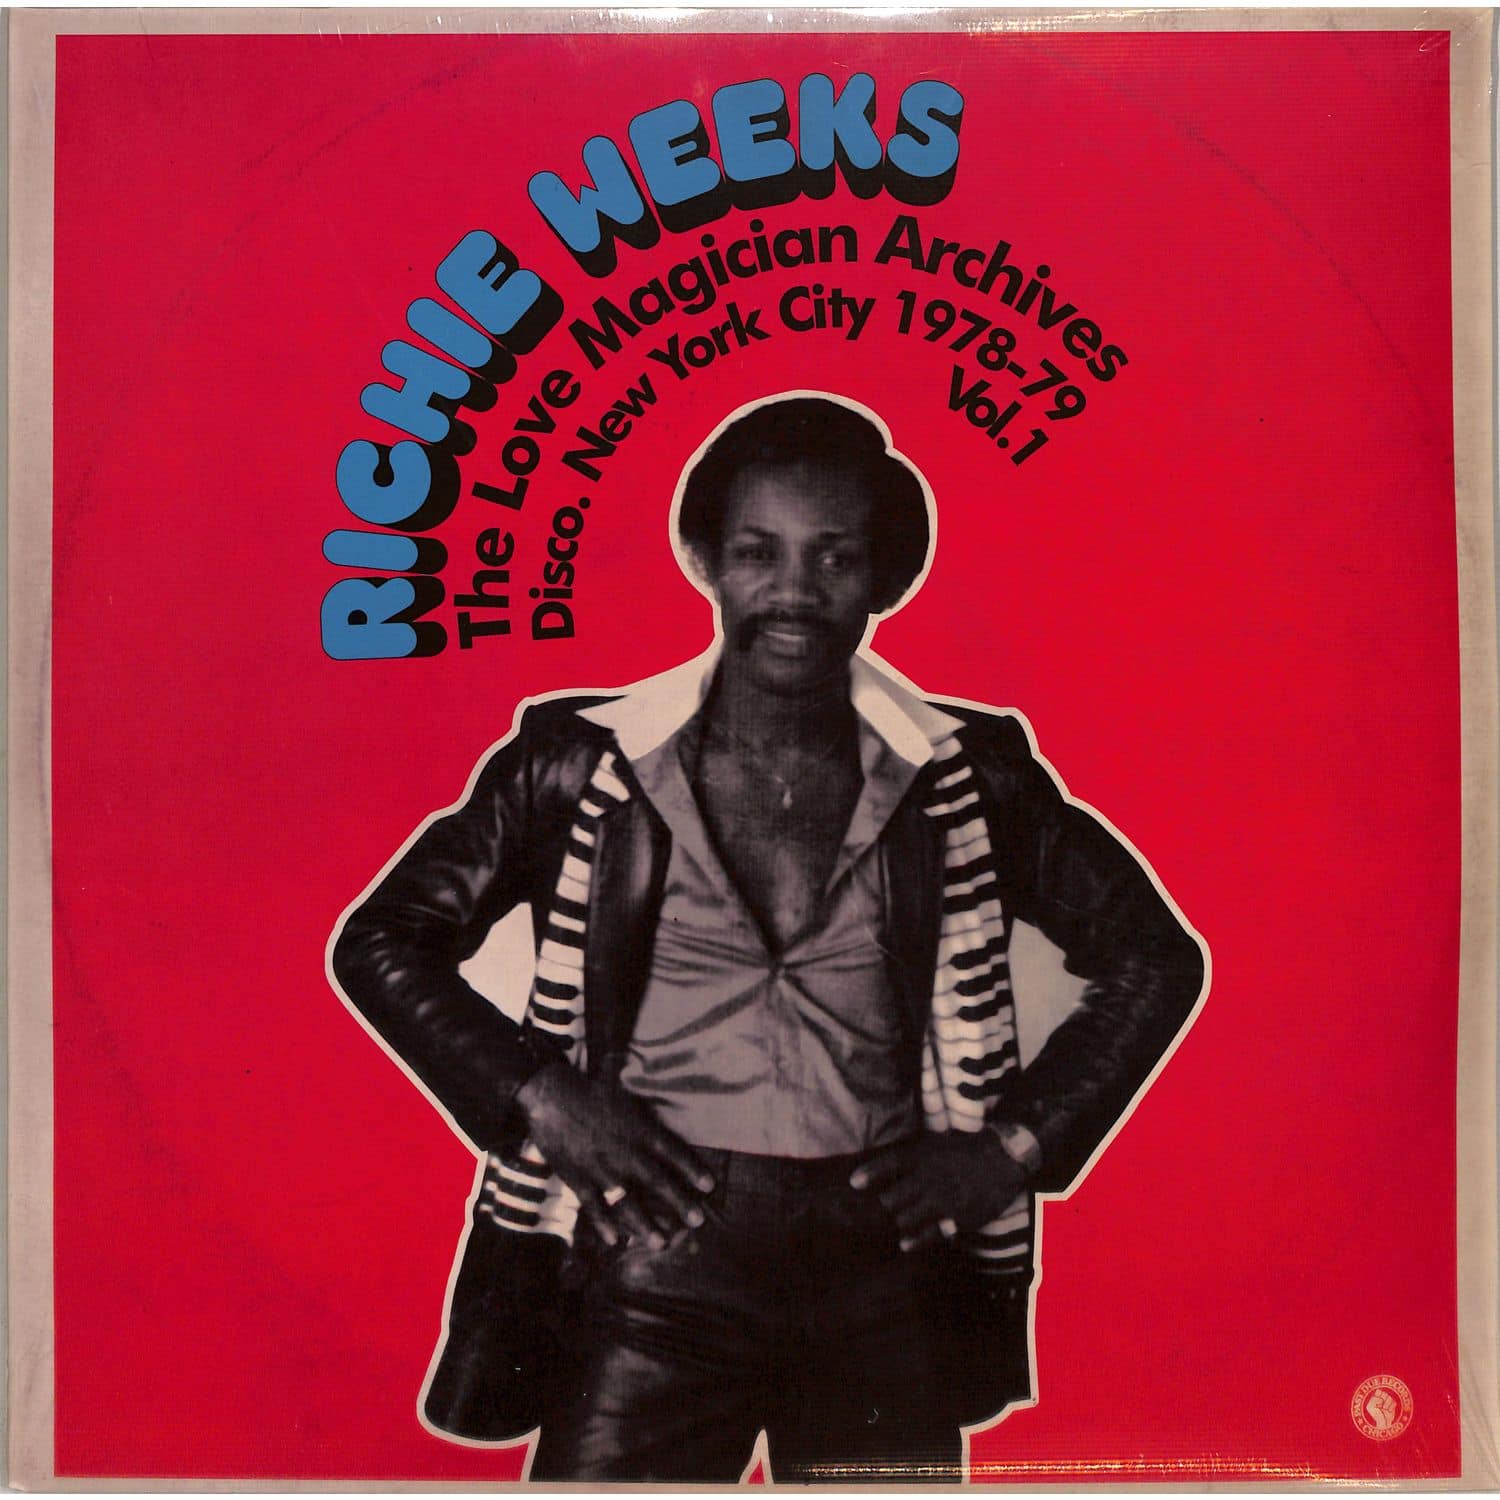 Richie Weeks - THE LOVE MAGICIAN ARCHIVES: DISCO NEW YORK CITY 1978-79 VOL 1 